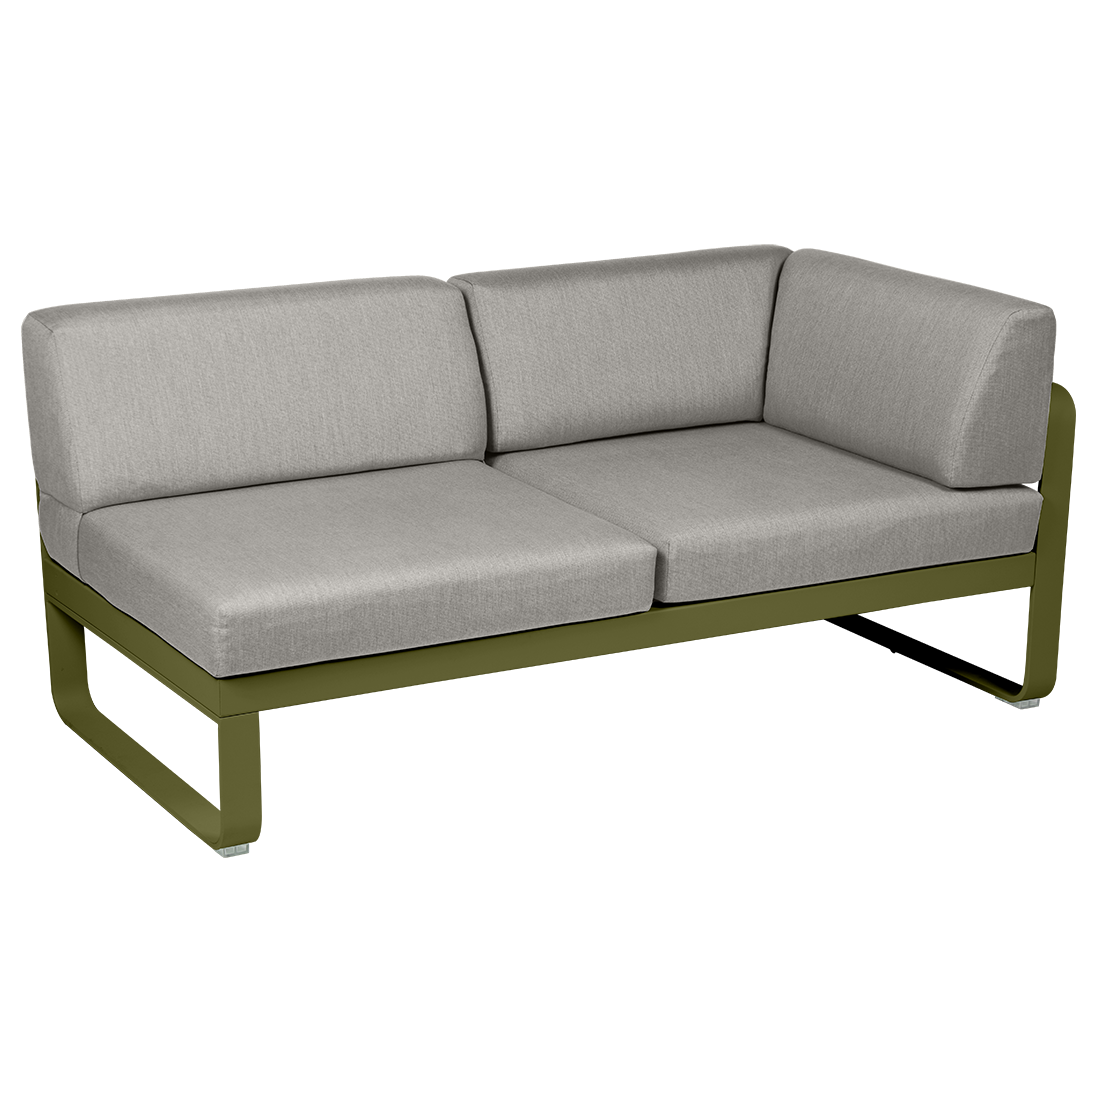 2-seater corner element BELLEVIE with side cushions - right